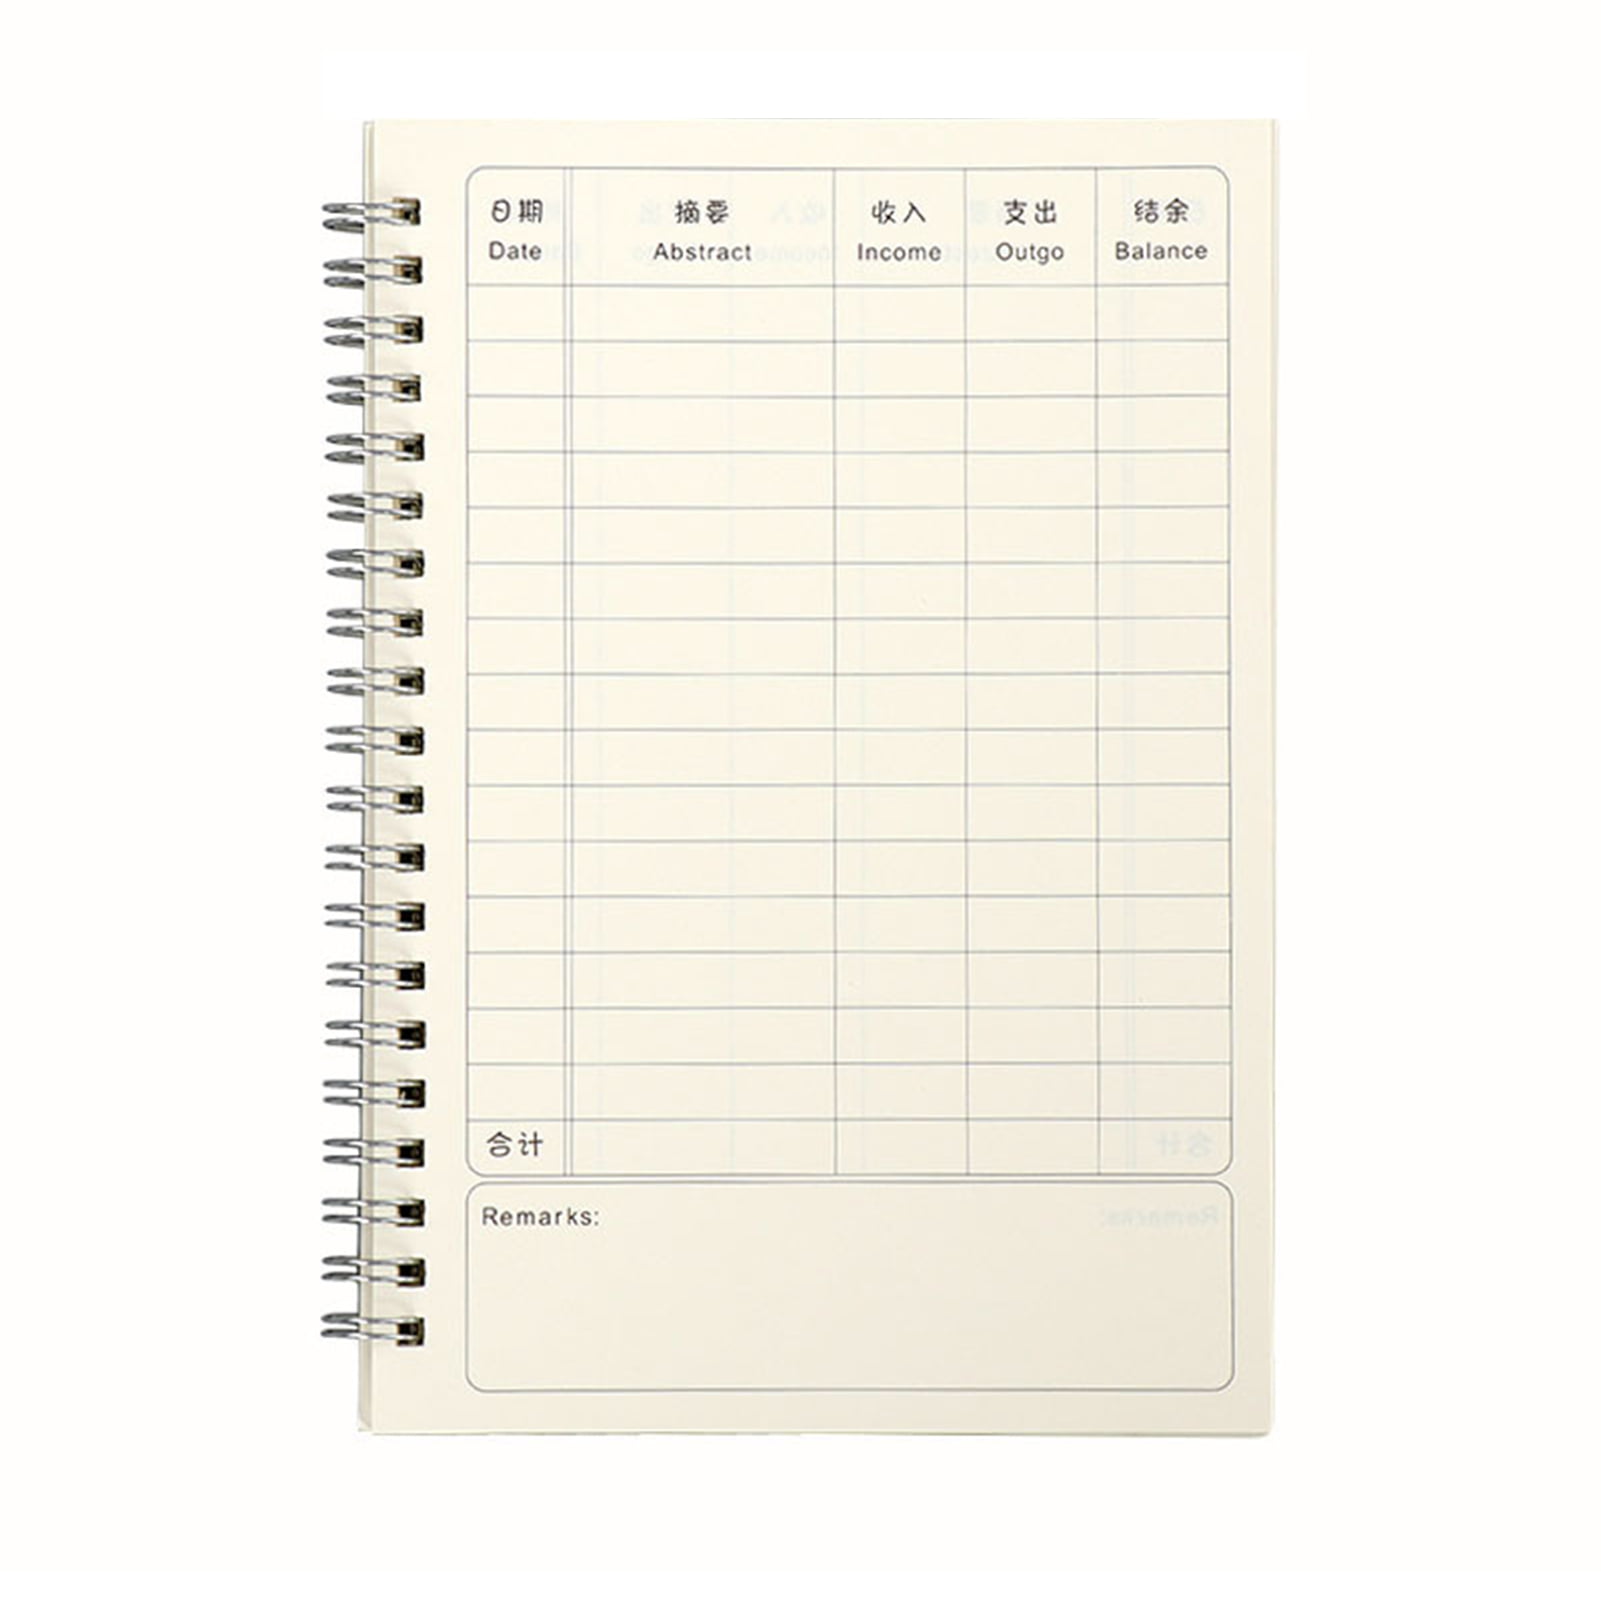 Details about   WOW Diary 2021 Woman A5 Productivity Organiser Weekly-Monthly Year Planner 